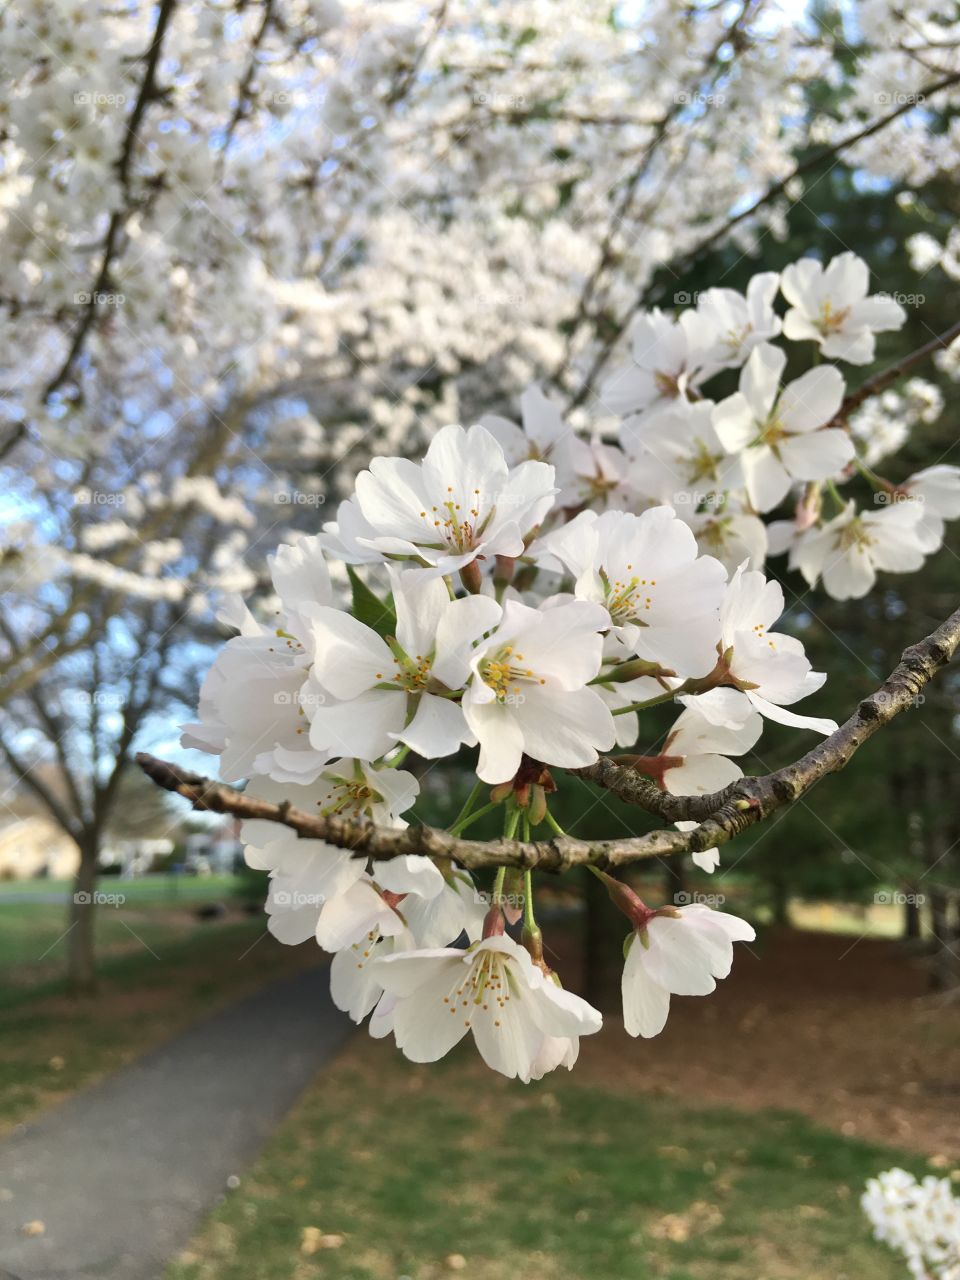 Beautiful white cherry blossoms in the park.